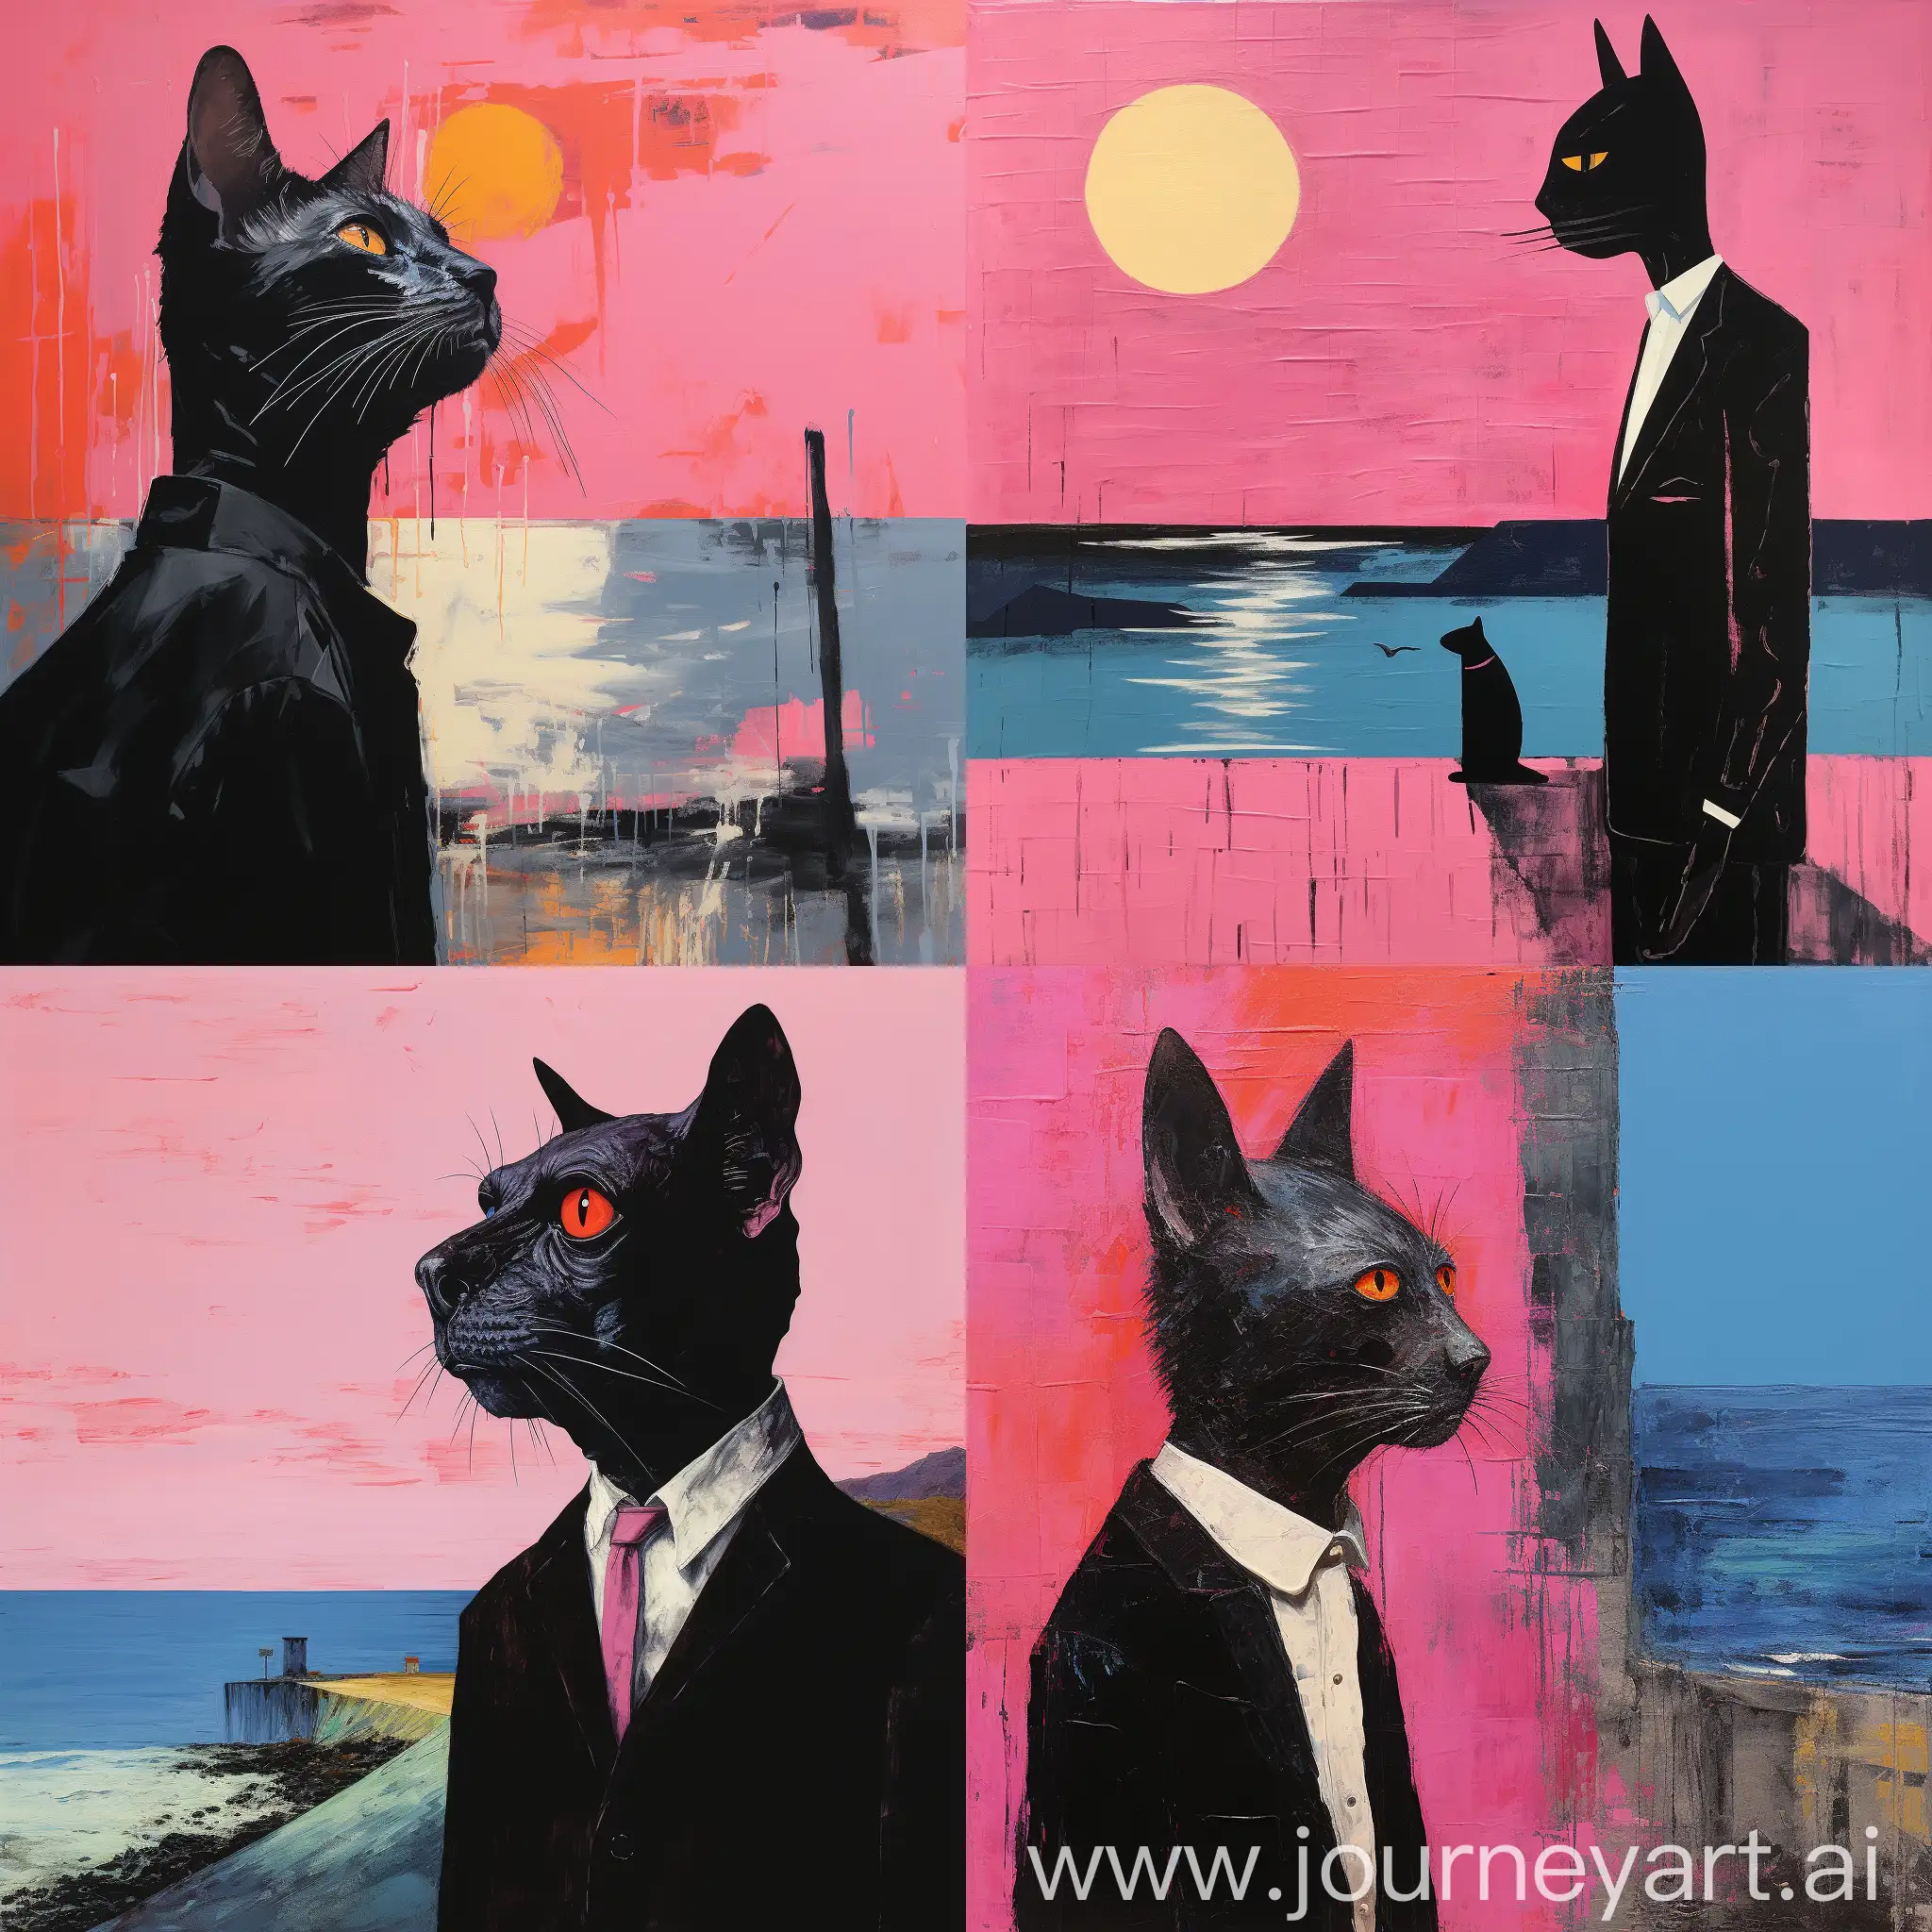 Fritz Scholder art style, serious black cat man with a facial scar, donning a pink suit, holding whimsical yet somber mood, British coast background, pastel hues profile picture, --v 5.2 --s 600 --c 10